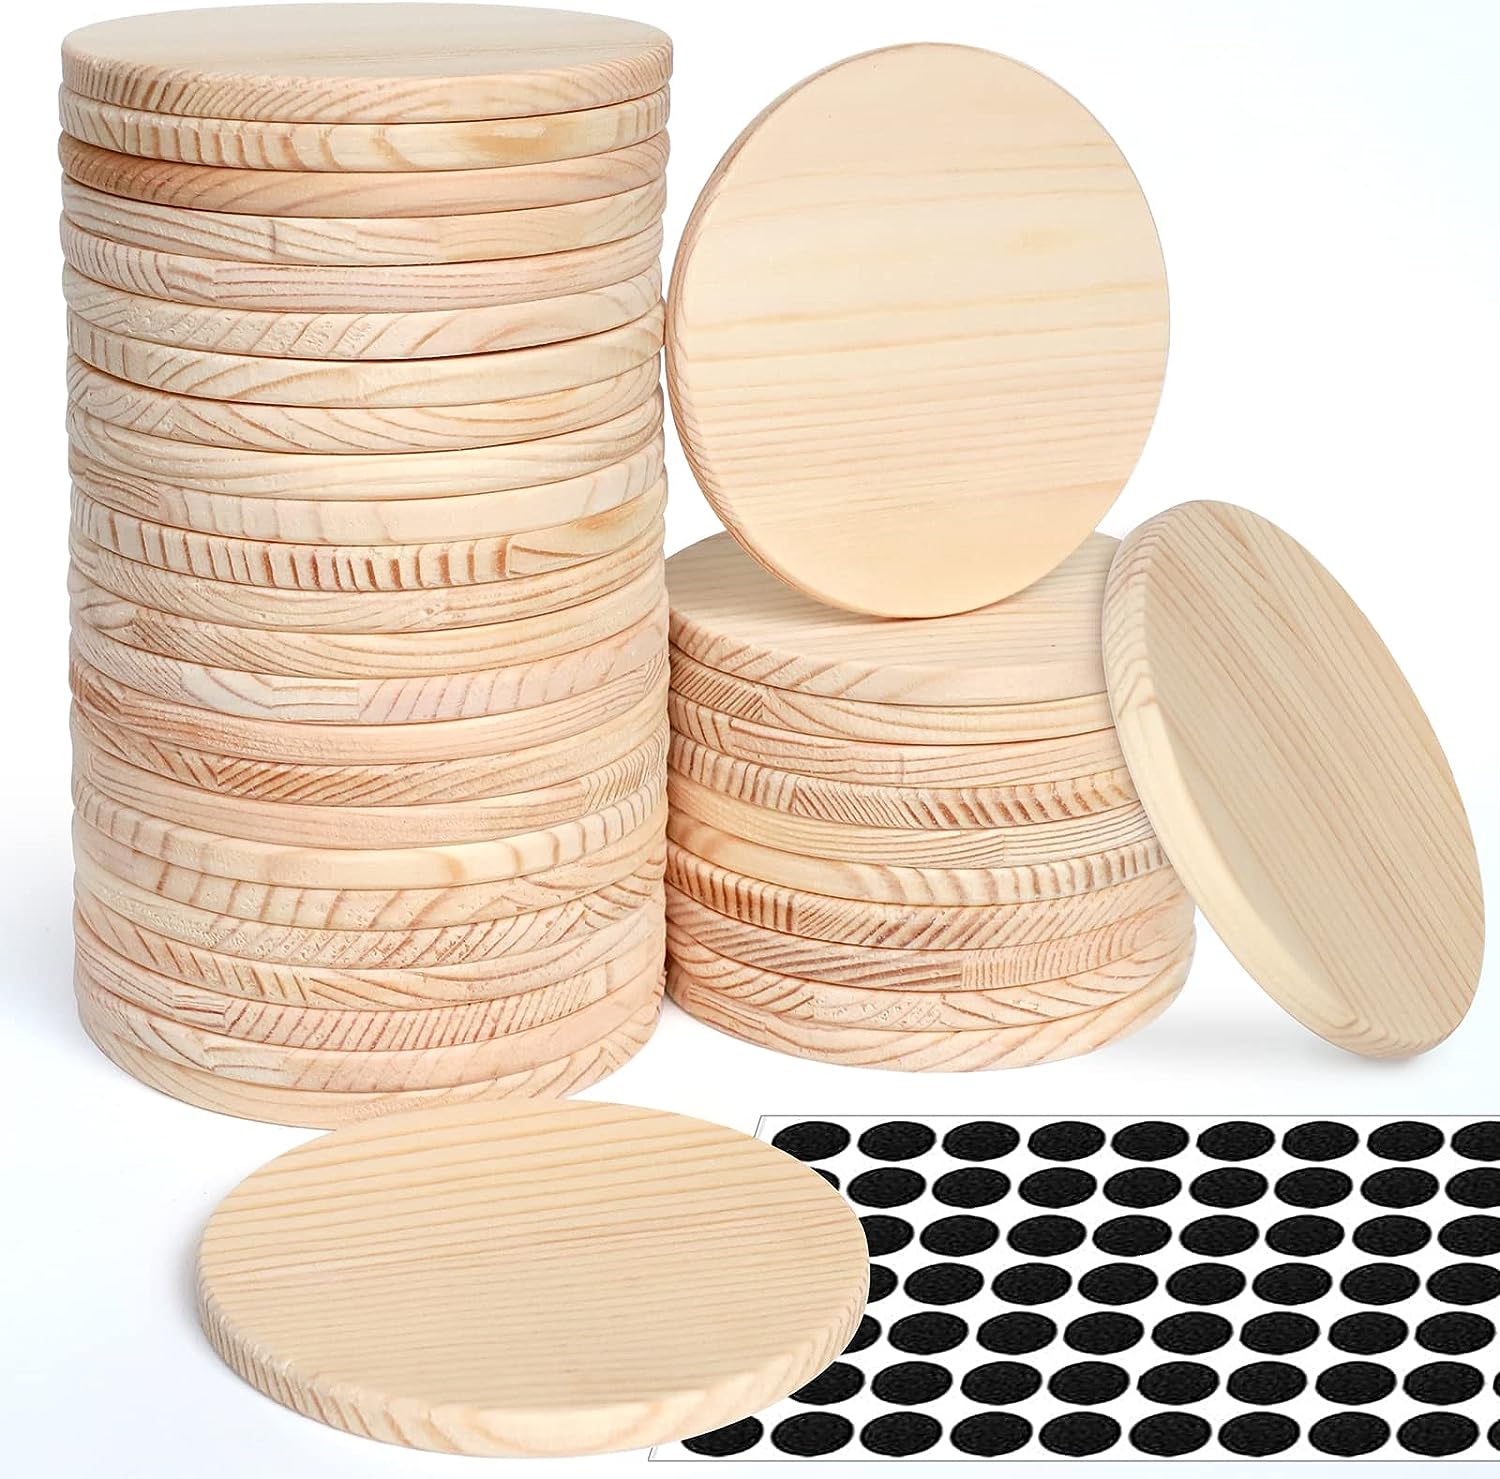 26 Pack Unfinished Wood Coasters, 4 inch Square Blank Wooden Coasters Crafts Coasters with Non-Slip Silicon Dots for DIY Architectural Models